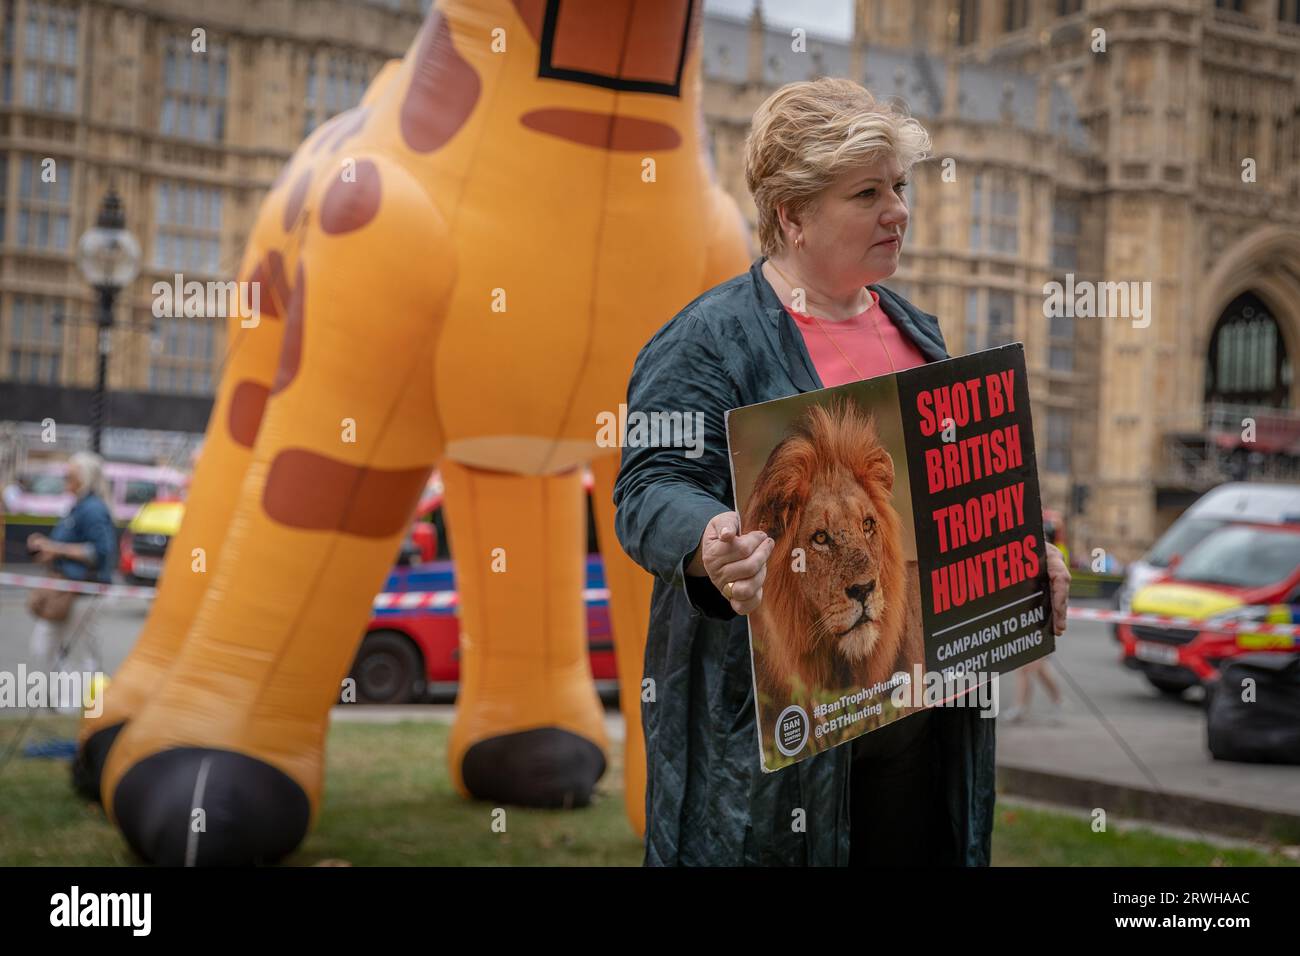 Ban Hunting Trophy importiert Bill Protest in Old Palace Yard, Westminster, London, Großbritannien Stockfoto